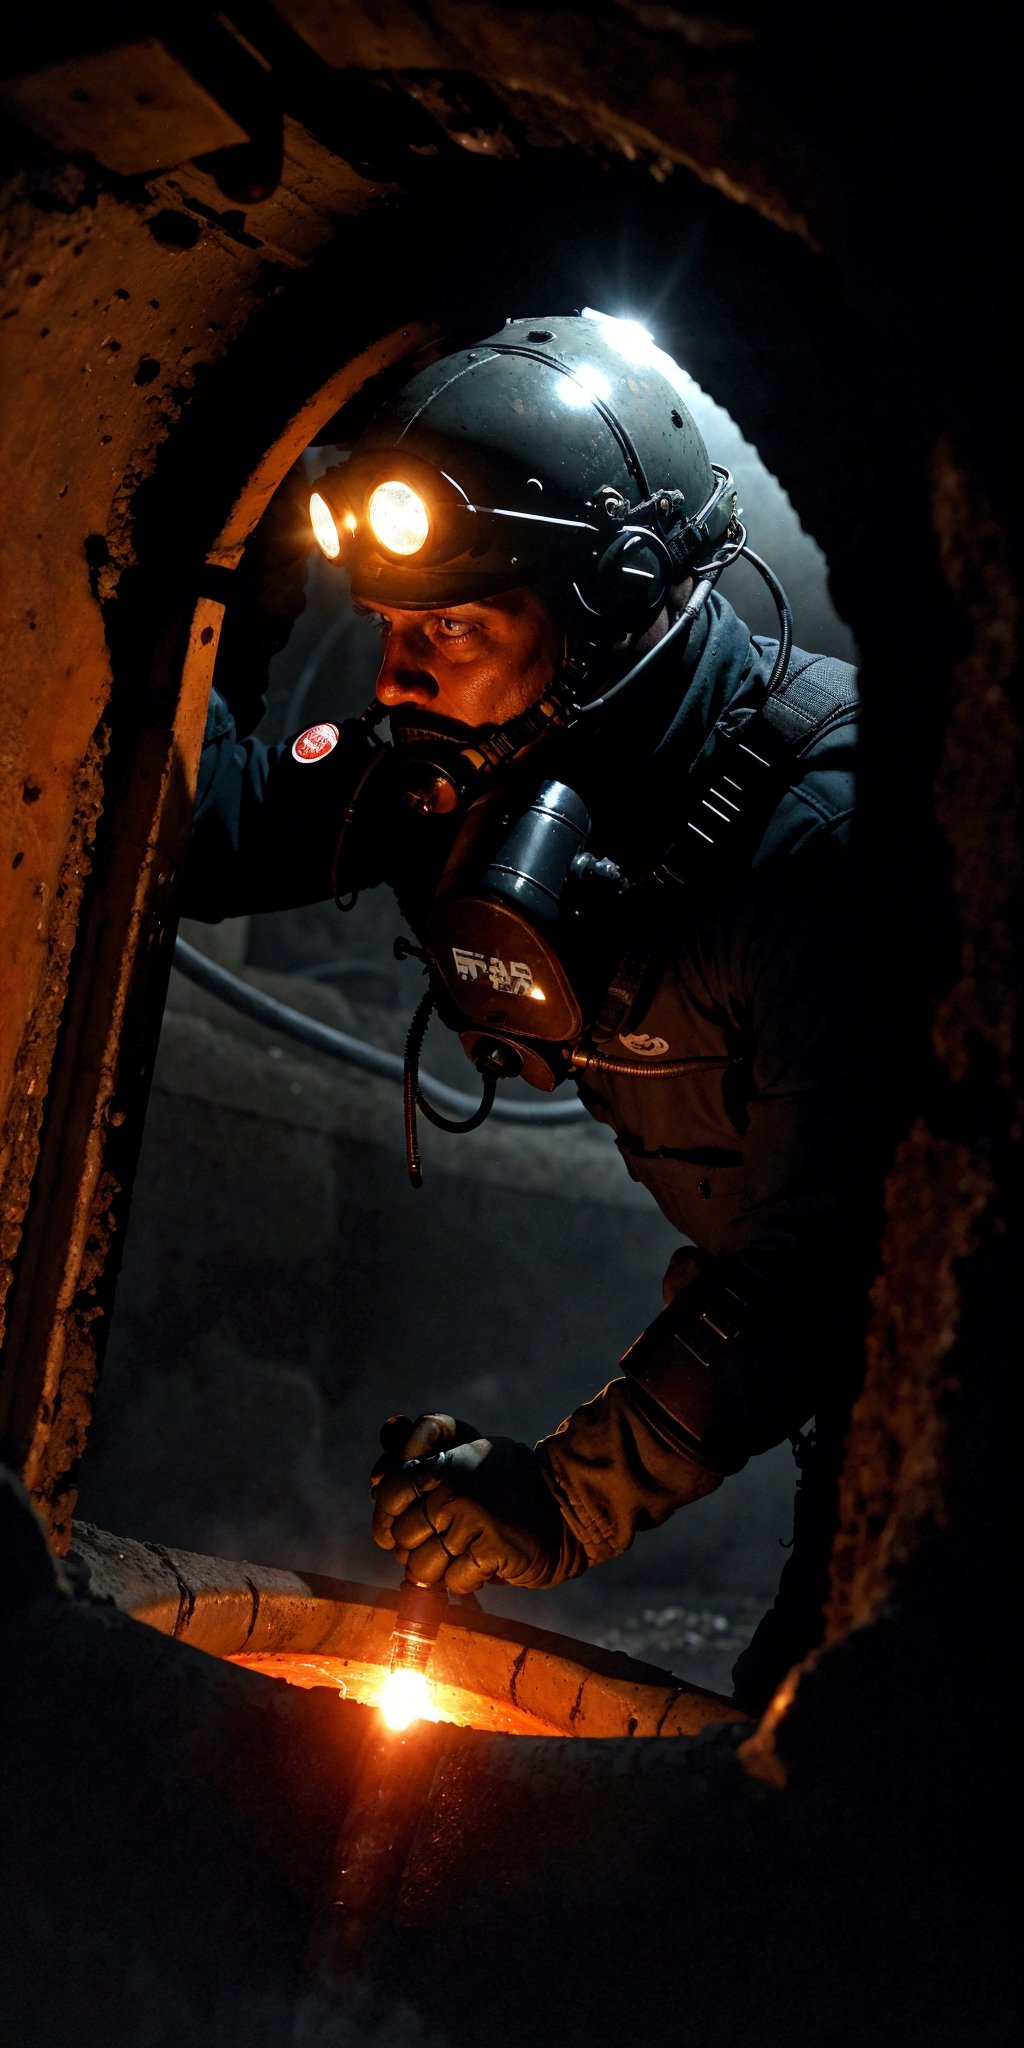 A County worker at Los Angeles Sewer line, using a Self Contained breathing apparatus, harnessed, hard hard, googles, gloves,  radio to communicate, flashlights, descending trough a steer manhole into a giant vault, humid, water vapor, mold, dim lights, rats, cockroaches, feces